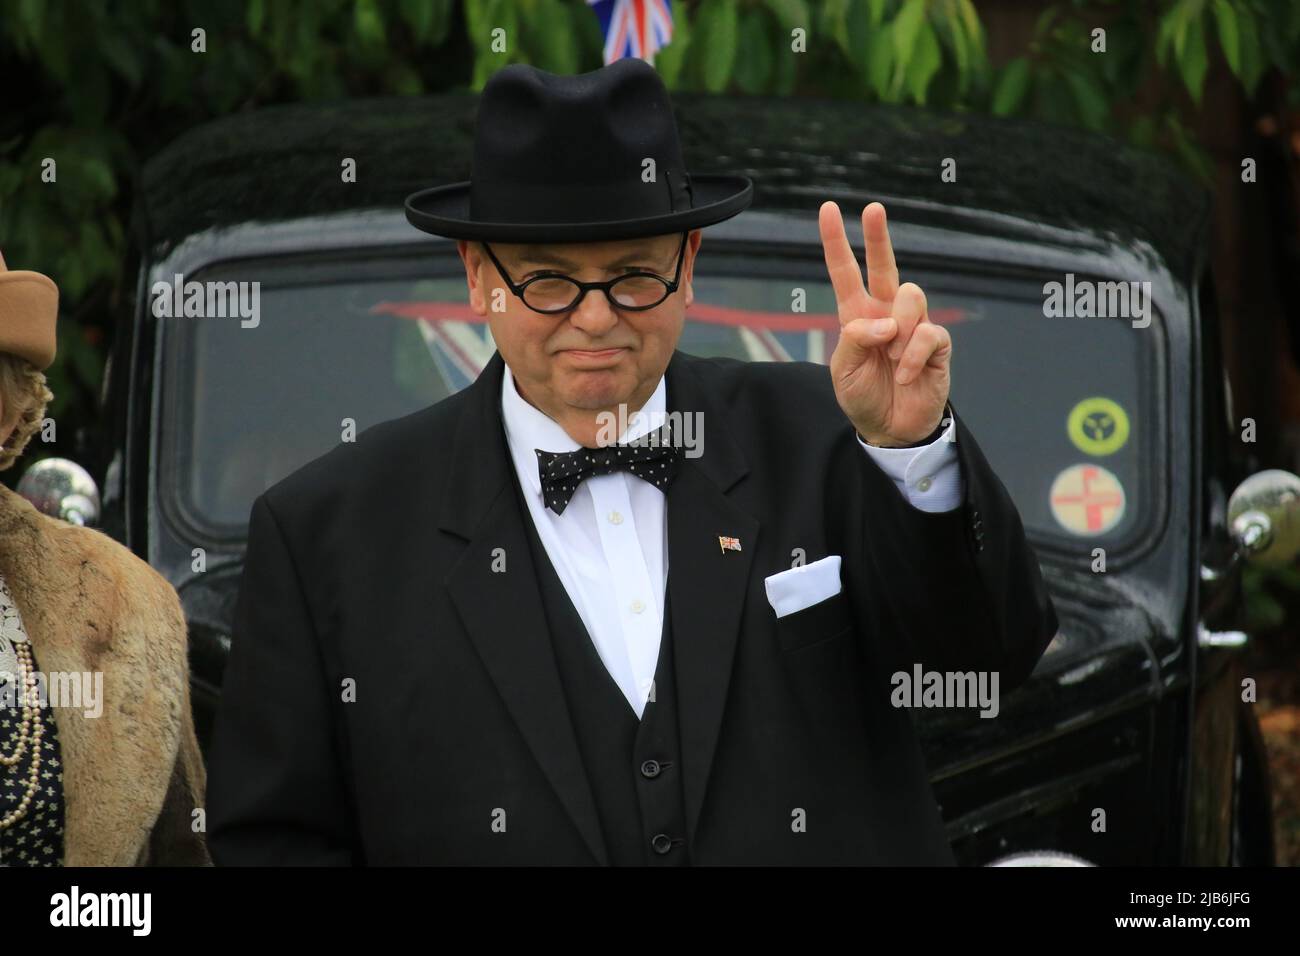 Wirral, UK. 3rd June, 2022. Winston Churchill impersonator opens the jubilee picnic in wirral Credit: IAN Fairbrother/Alamy Live News Stock Photo